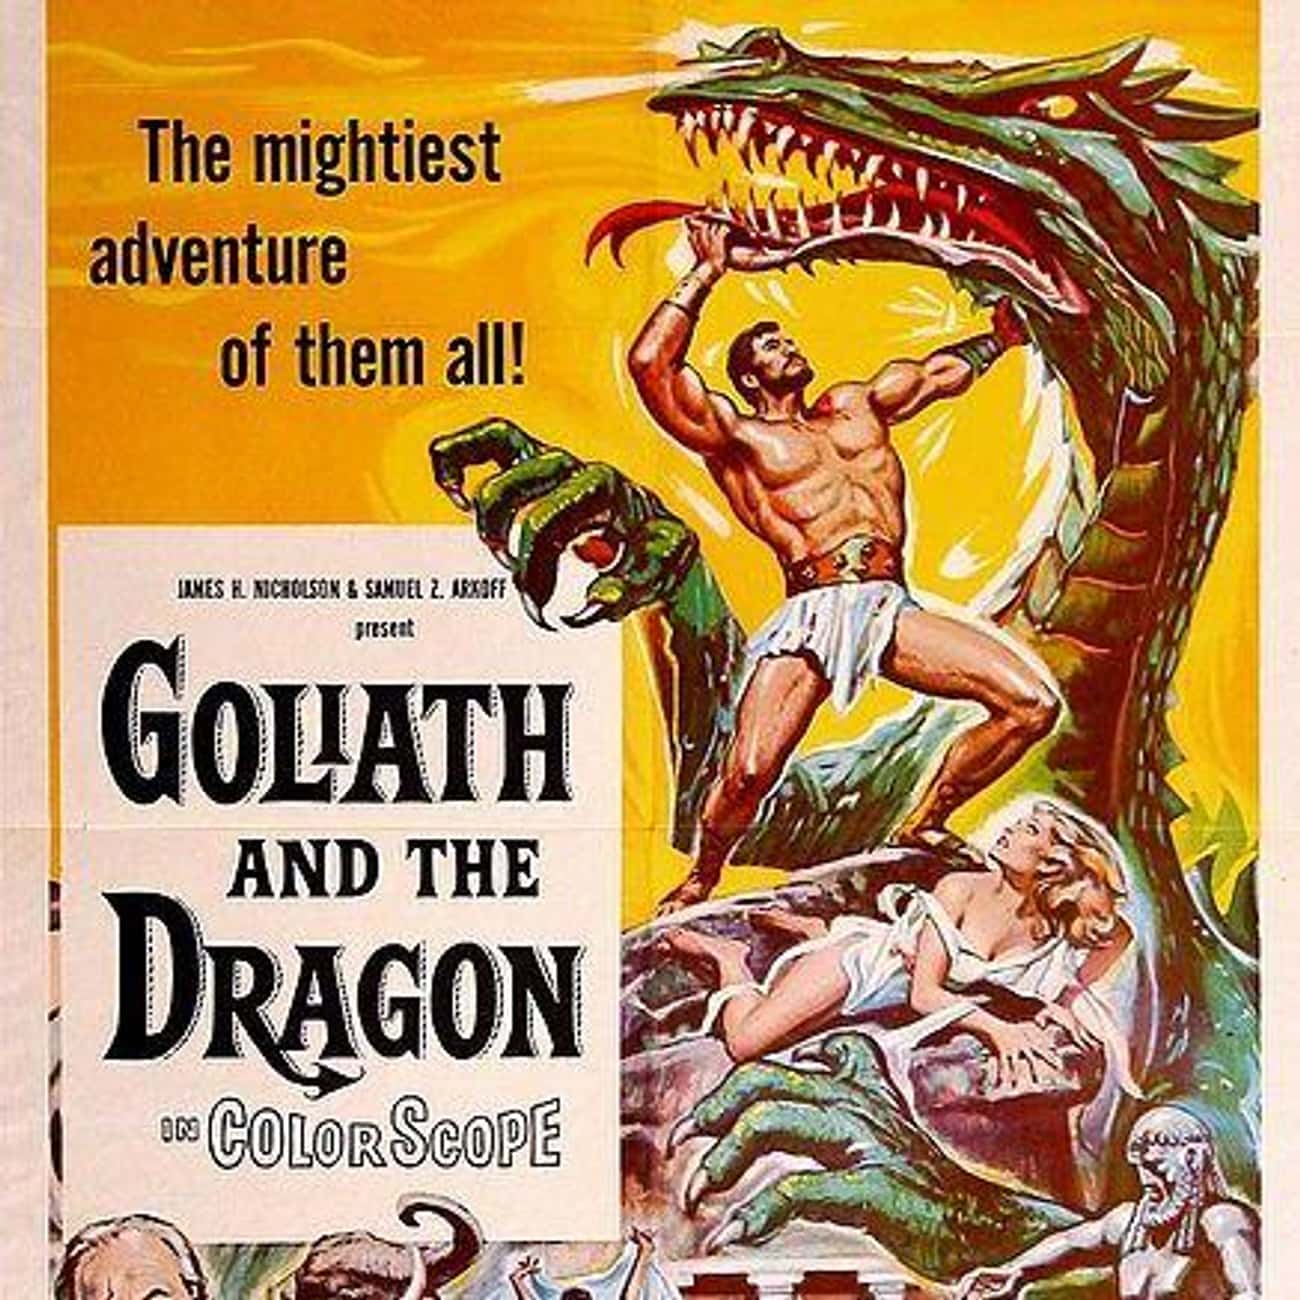 Goliath and the Dragon